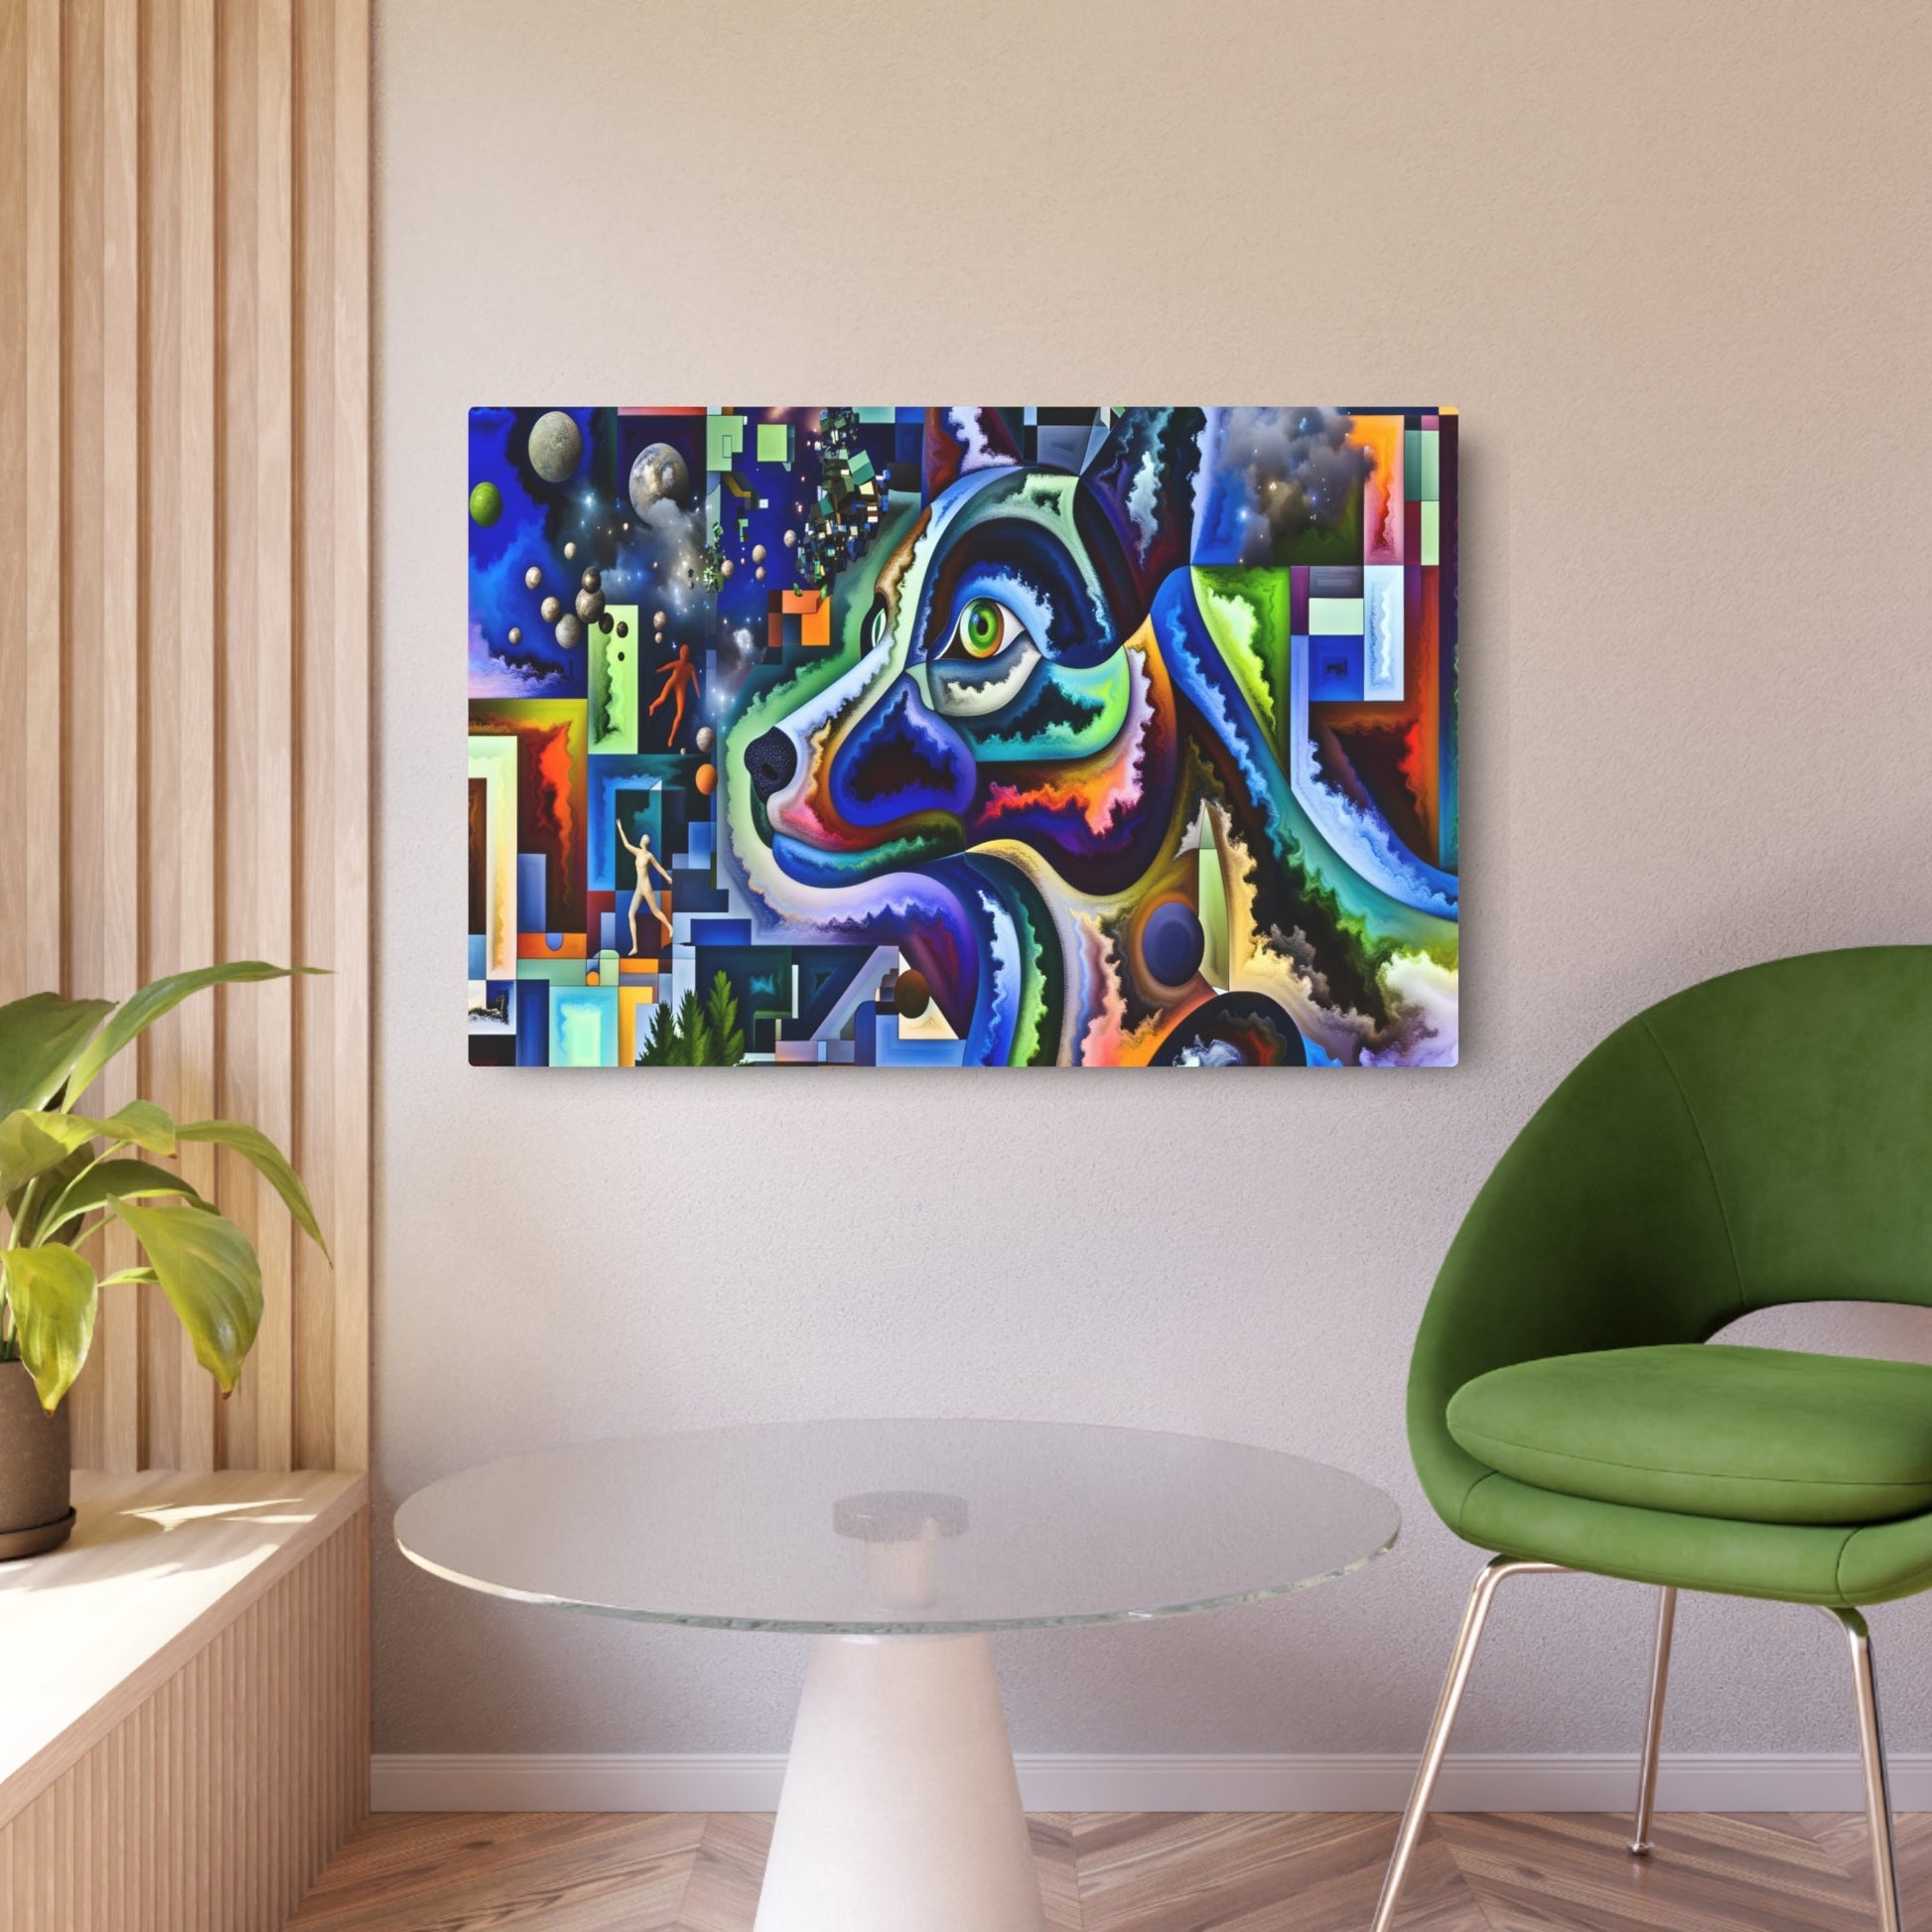 Metal Poster Art | "Modern Contemporary Surrealism Art - Cosmic Canine Portrait with Abstract Cityscape and Forest Transformation, Bold Contrasting Colors & Floating Elements" - Metal Poster Art 36″ x 24″ (Horizontal) 0.12''